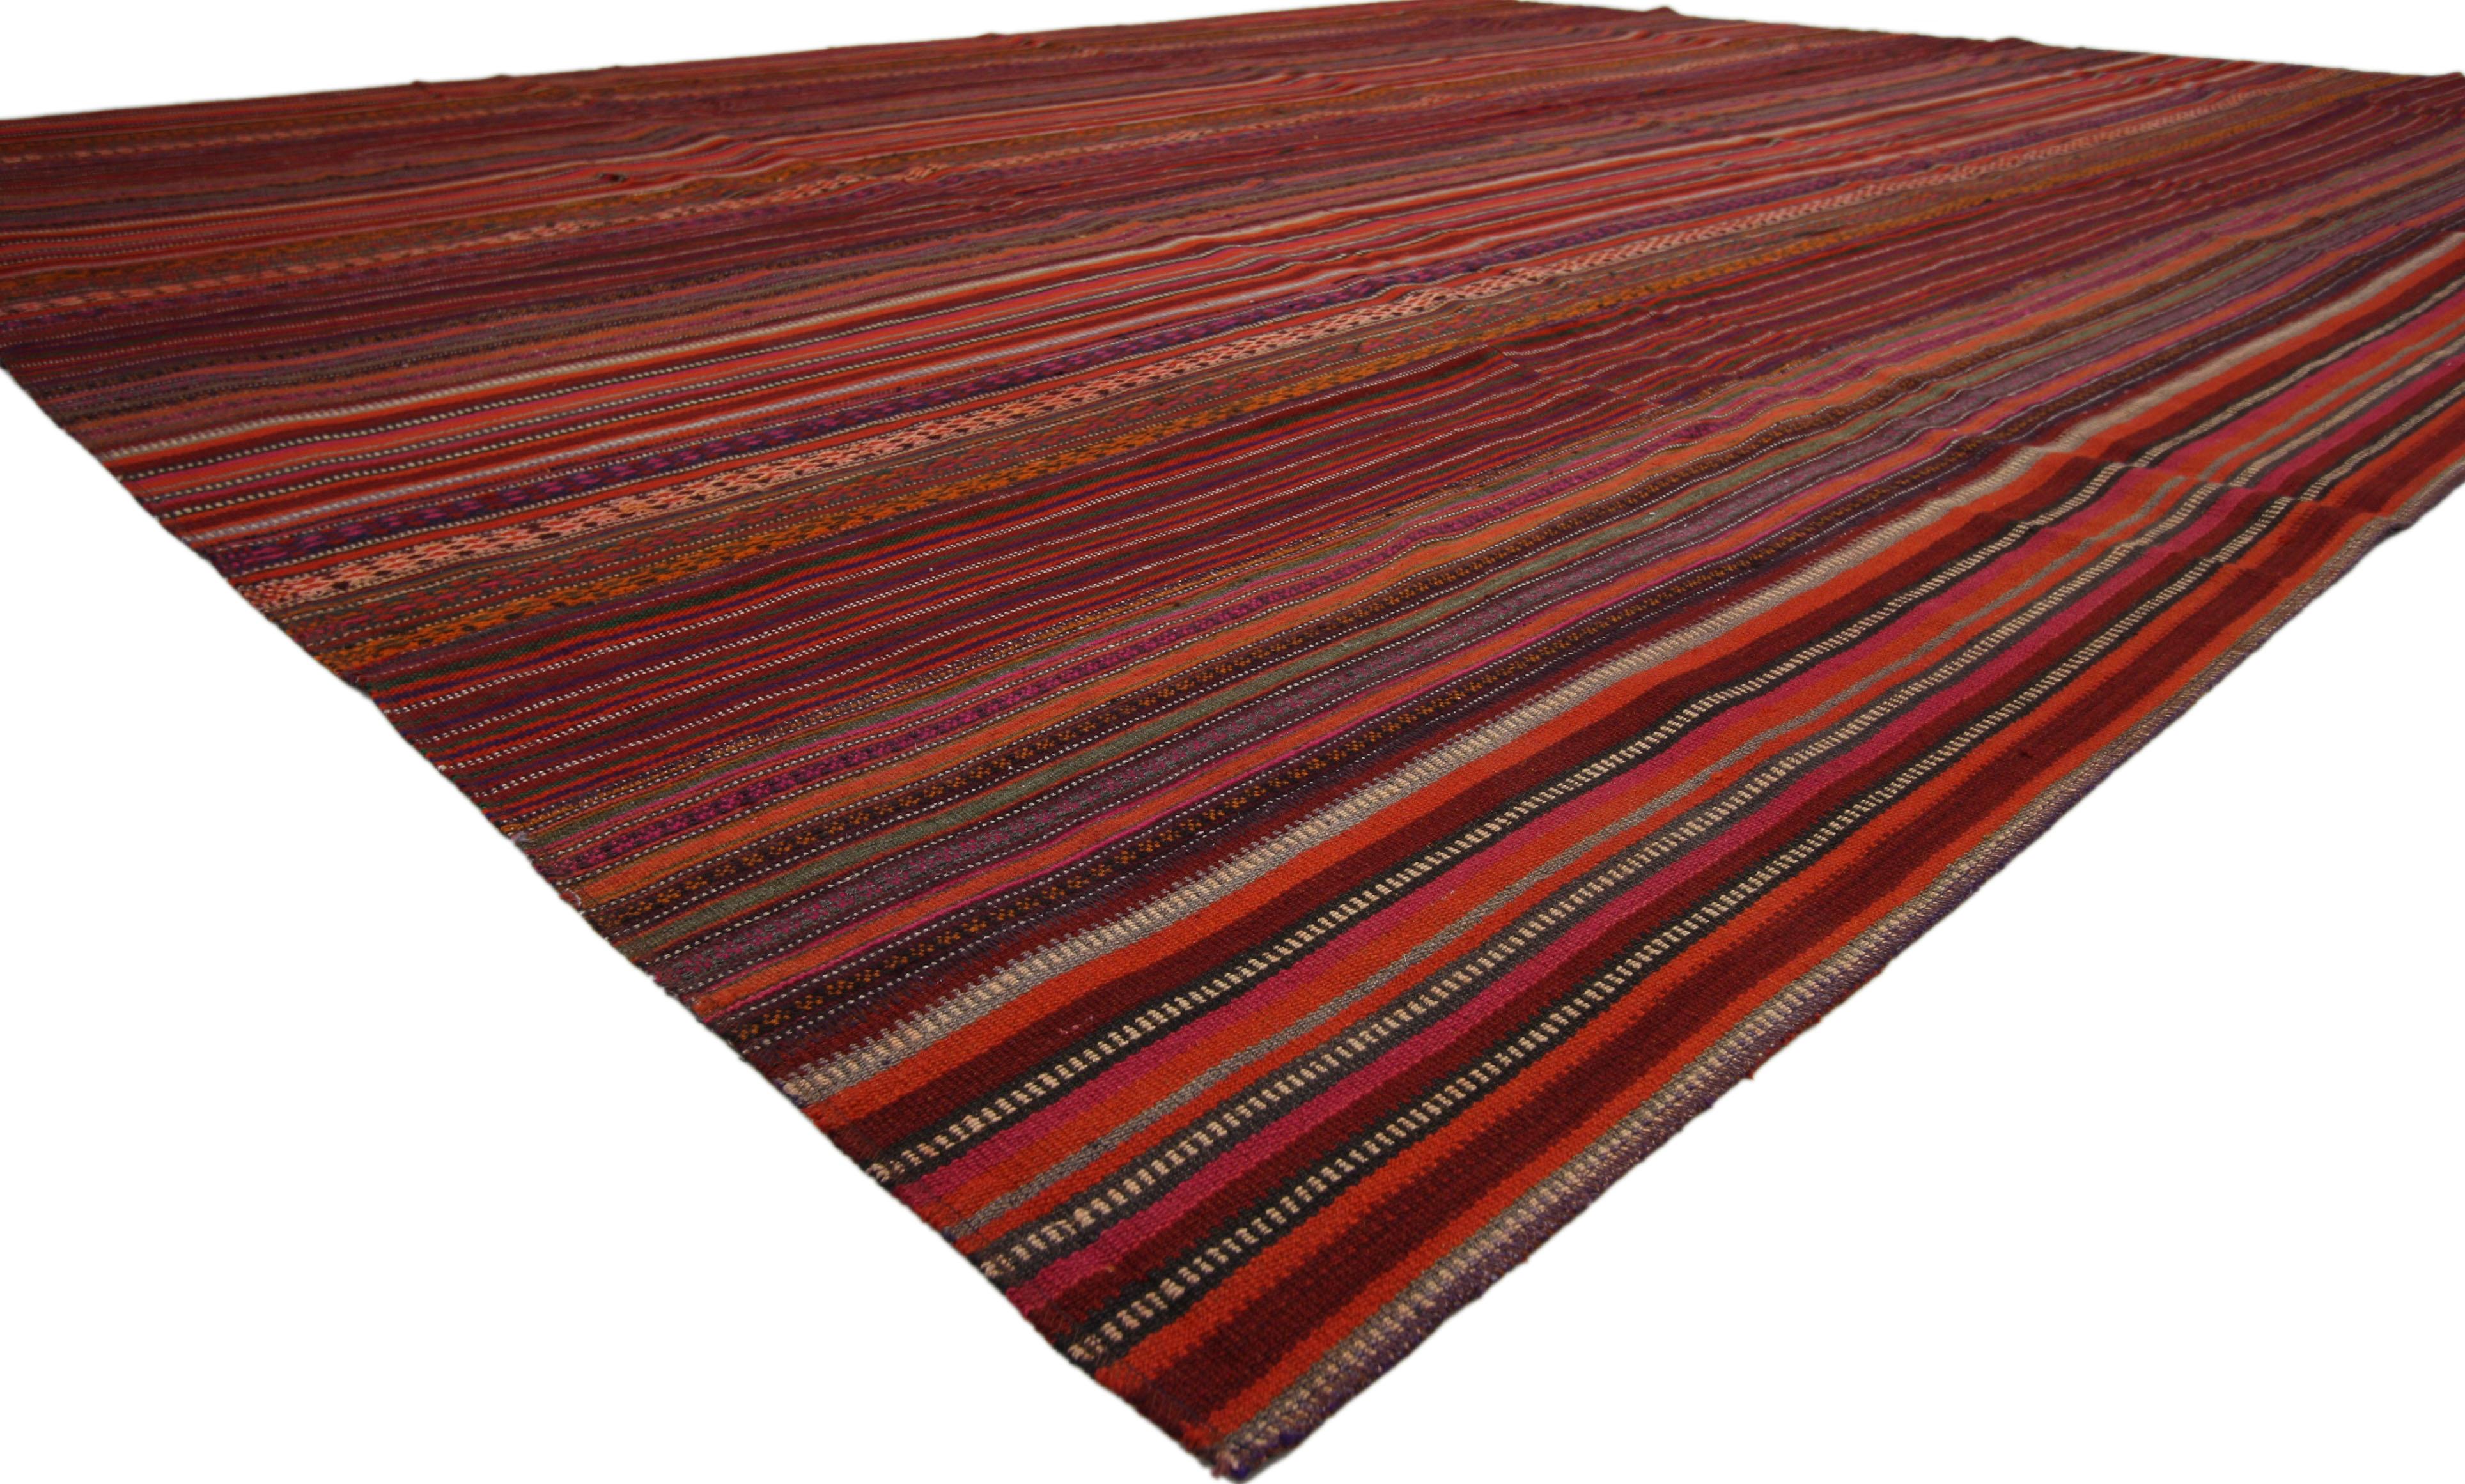 Vintage Turkish Striped Kilim Rug with Modern Rustic Cabin Style  7